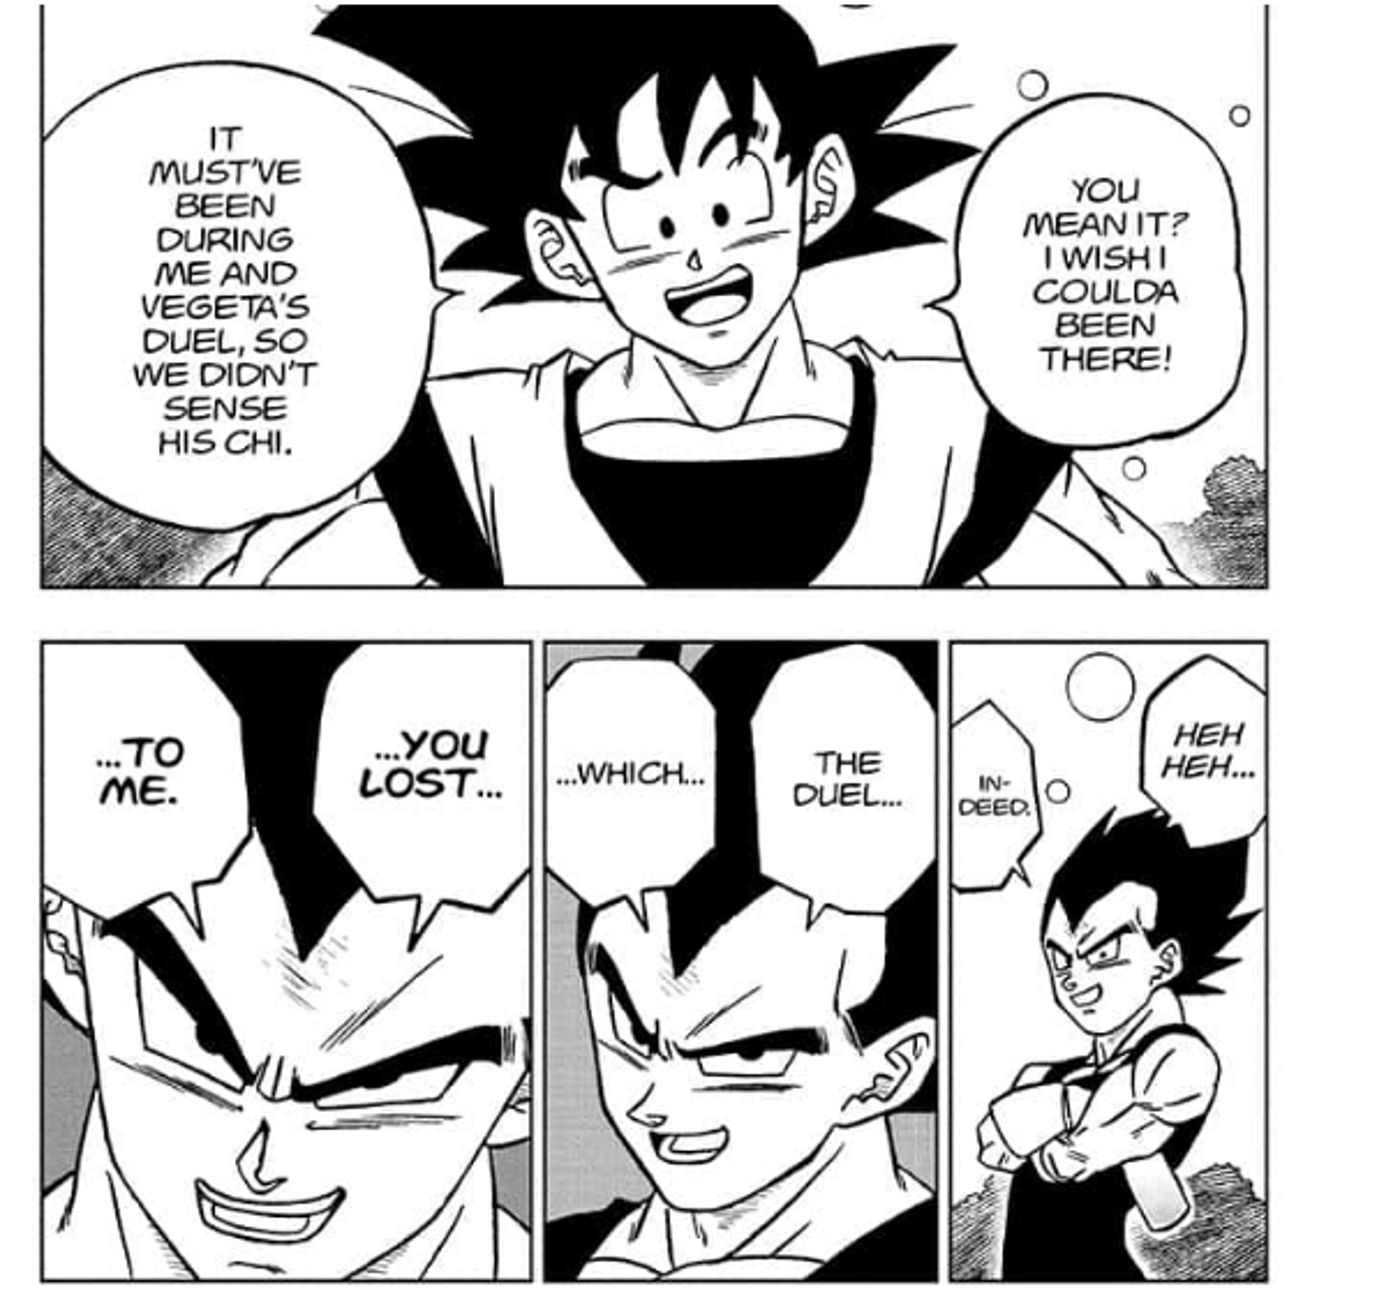 Vegeta reminds Goku that he lost their sparring match in Dragon Ball Super